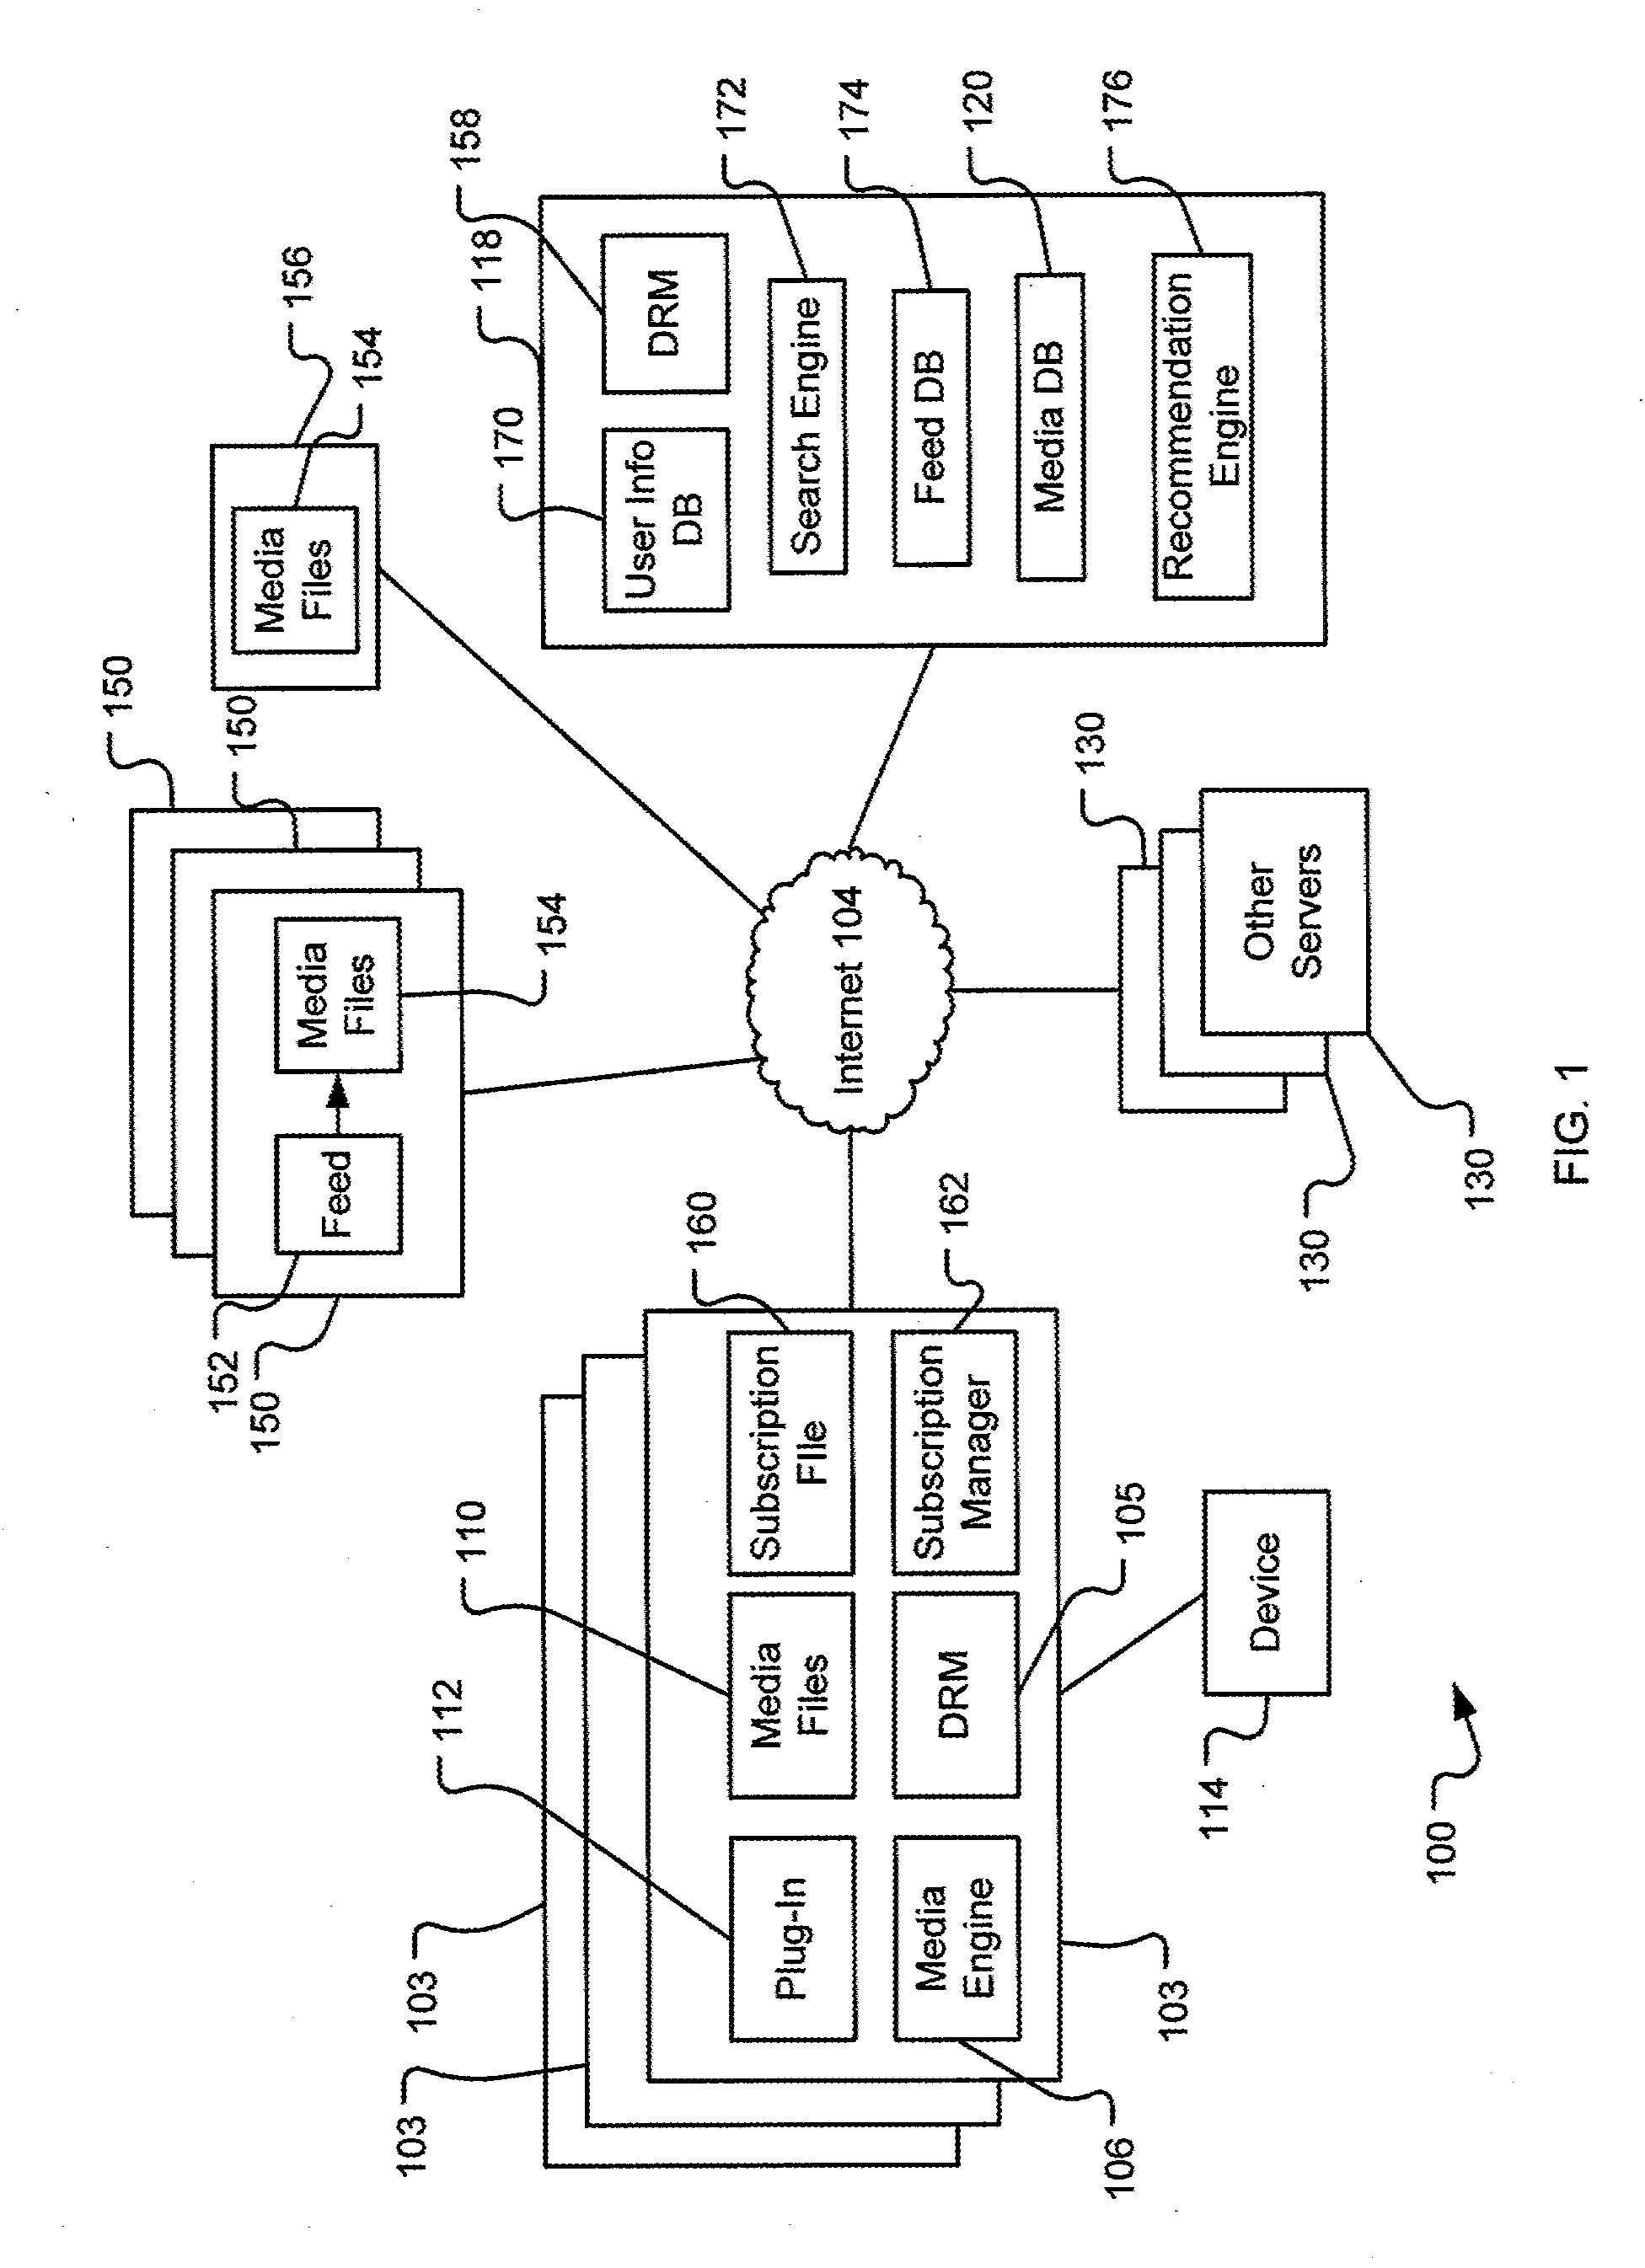 Method and system for using smart tags and a recommendation engine using smart tags